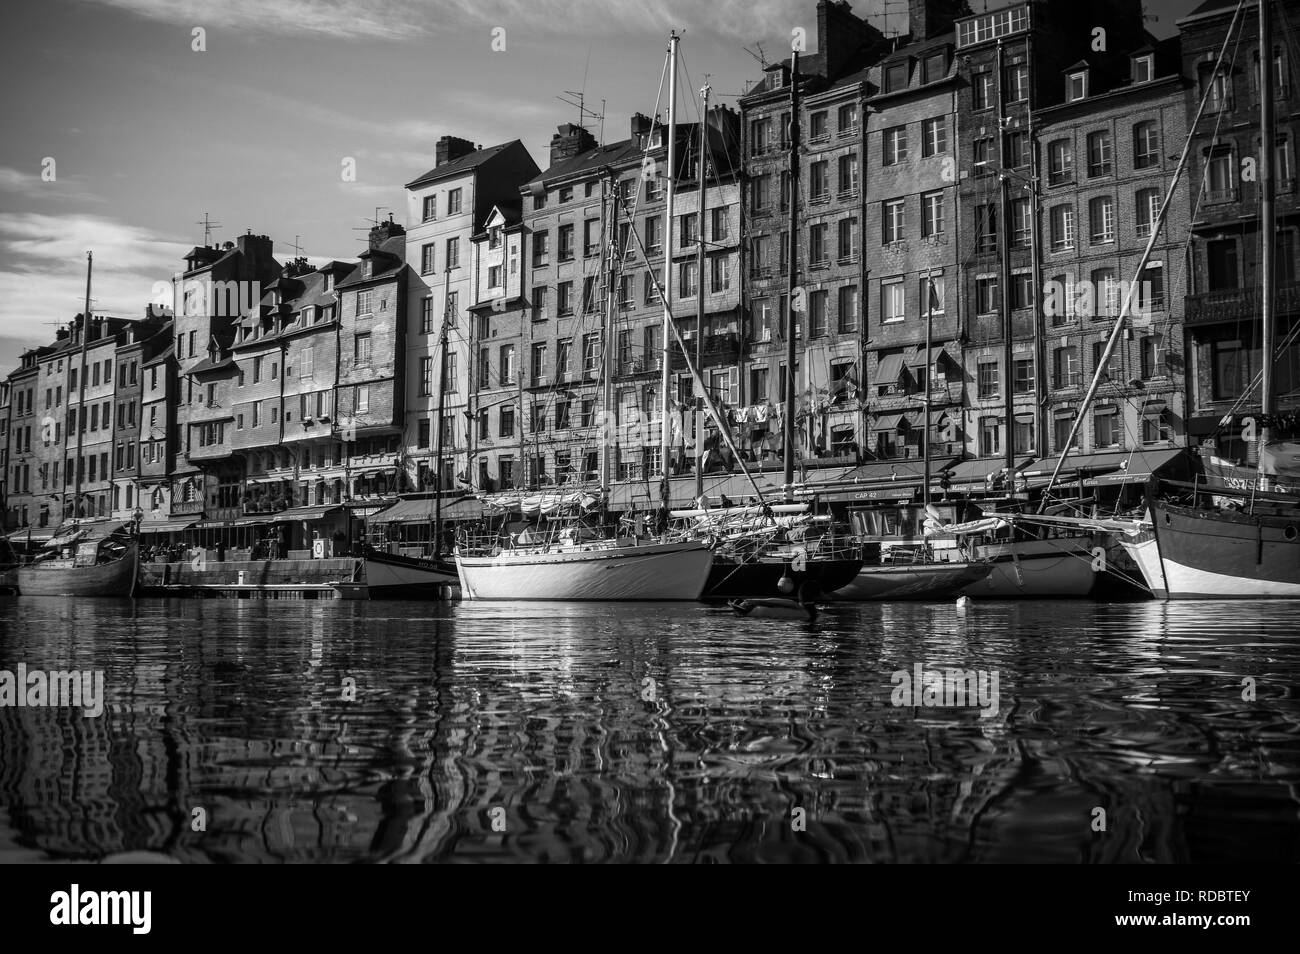 Honfleur, normandy city in France Stock Photo - Alamy